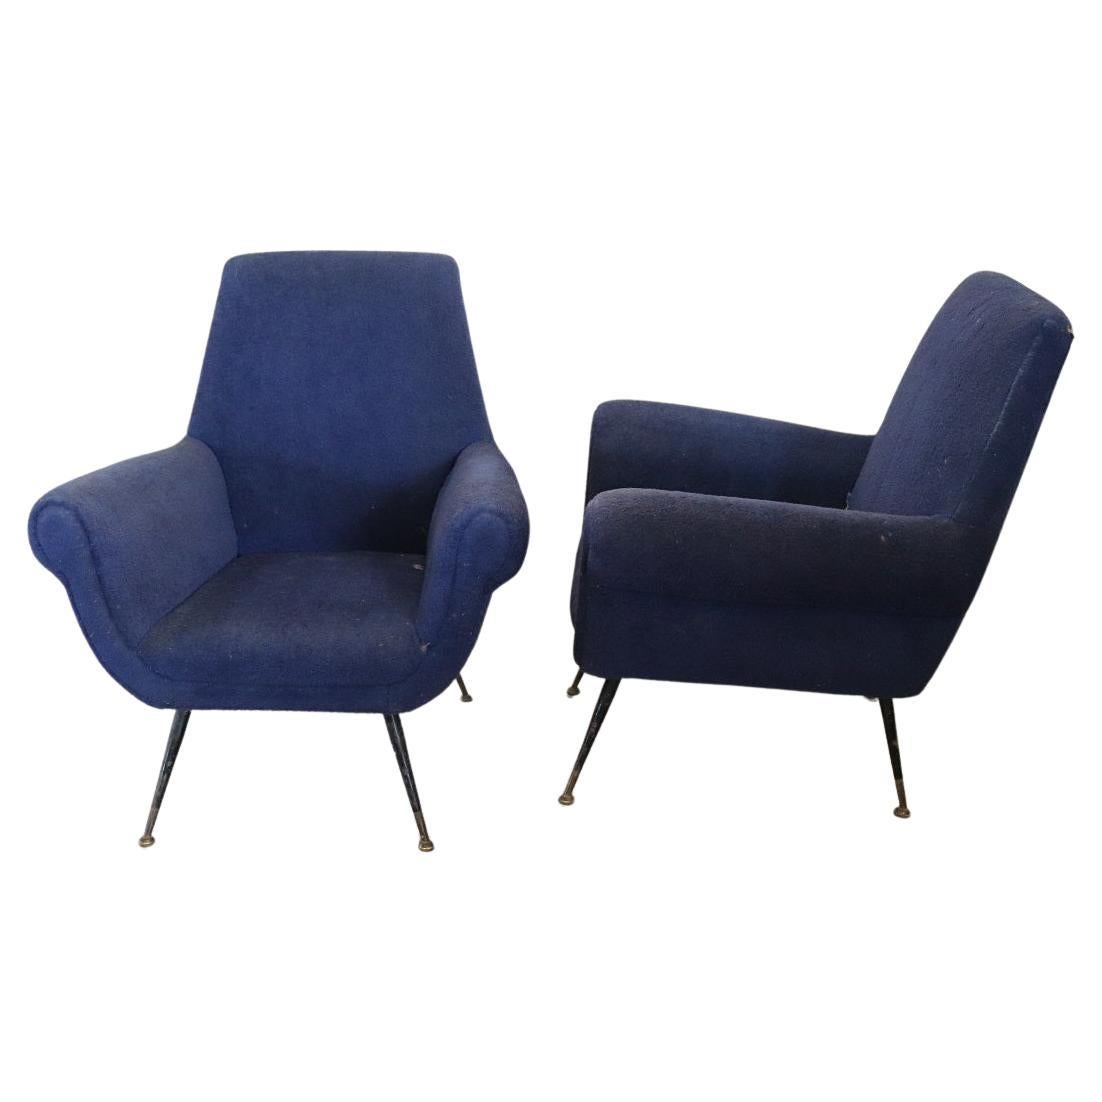 Italian Design Pair of Armchairs by Gigi Radice for Minotti, 1950s For Sale